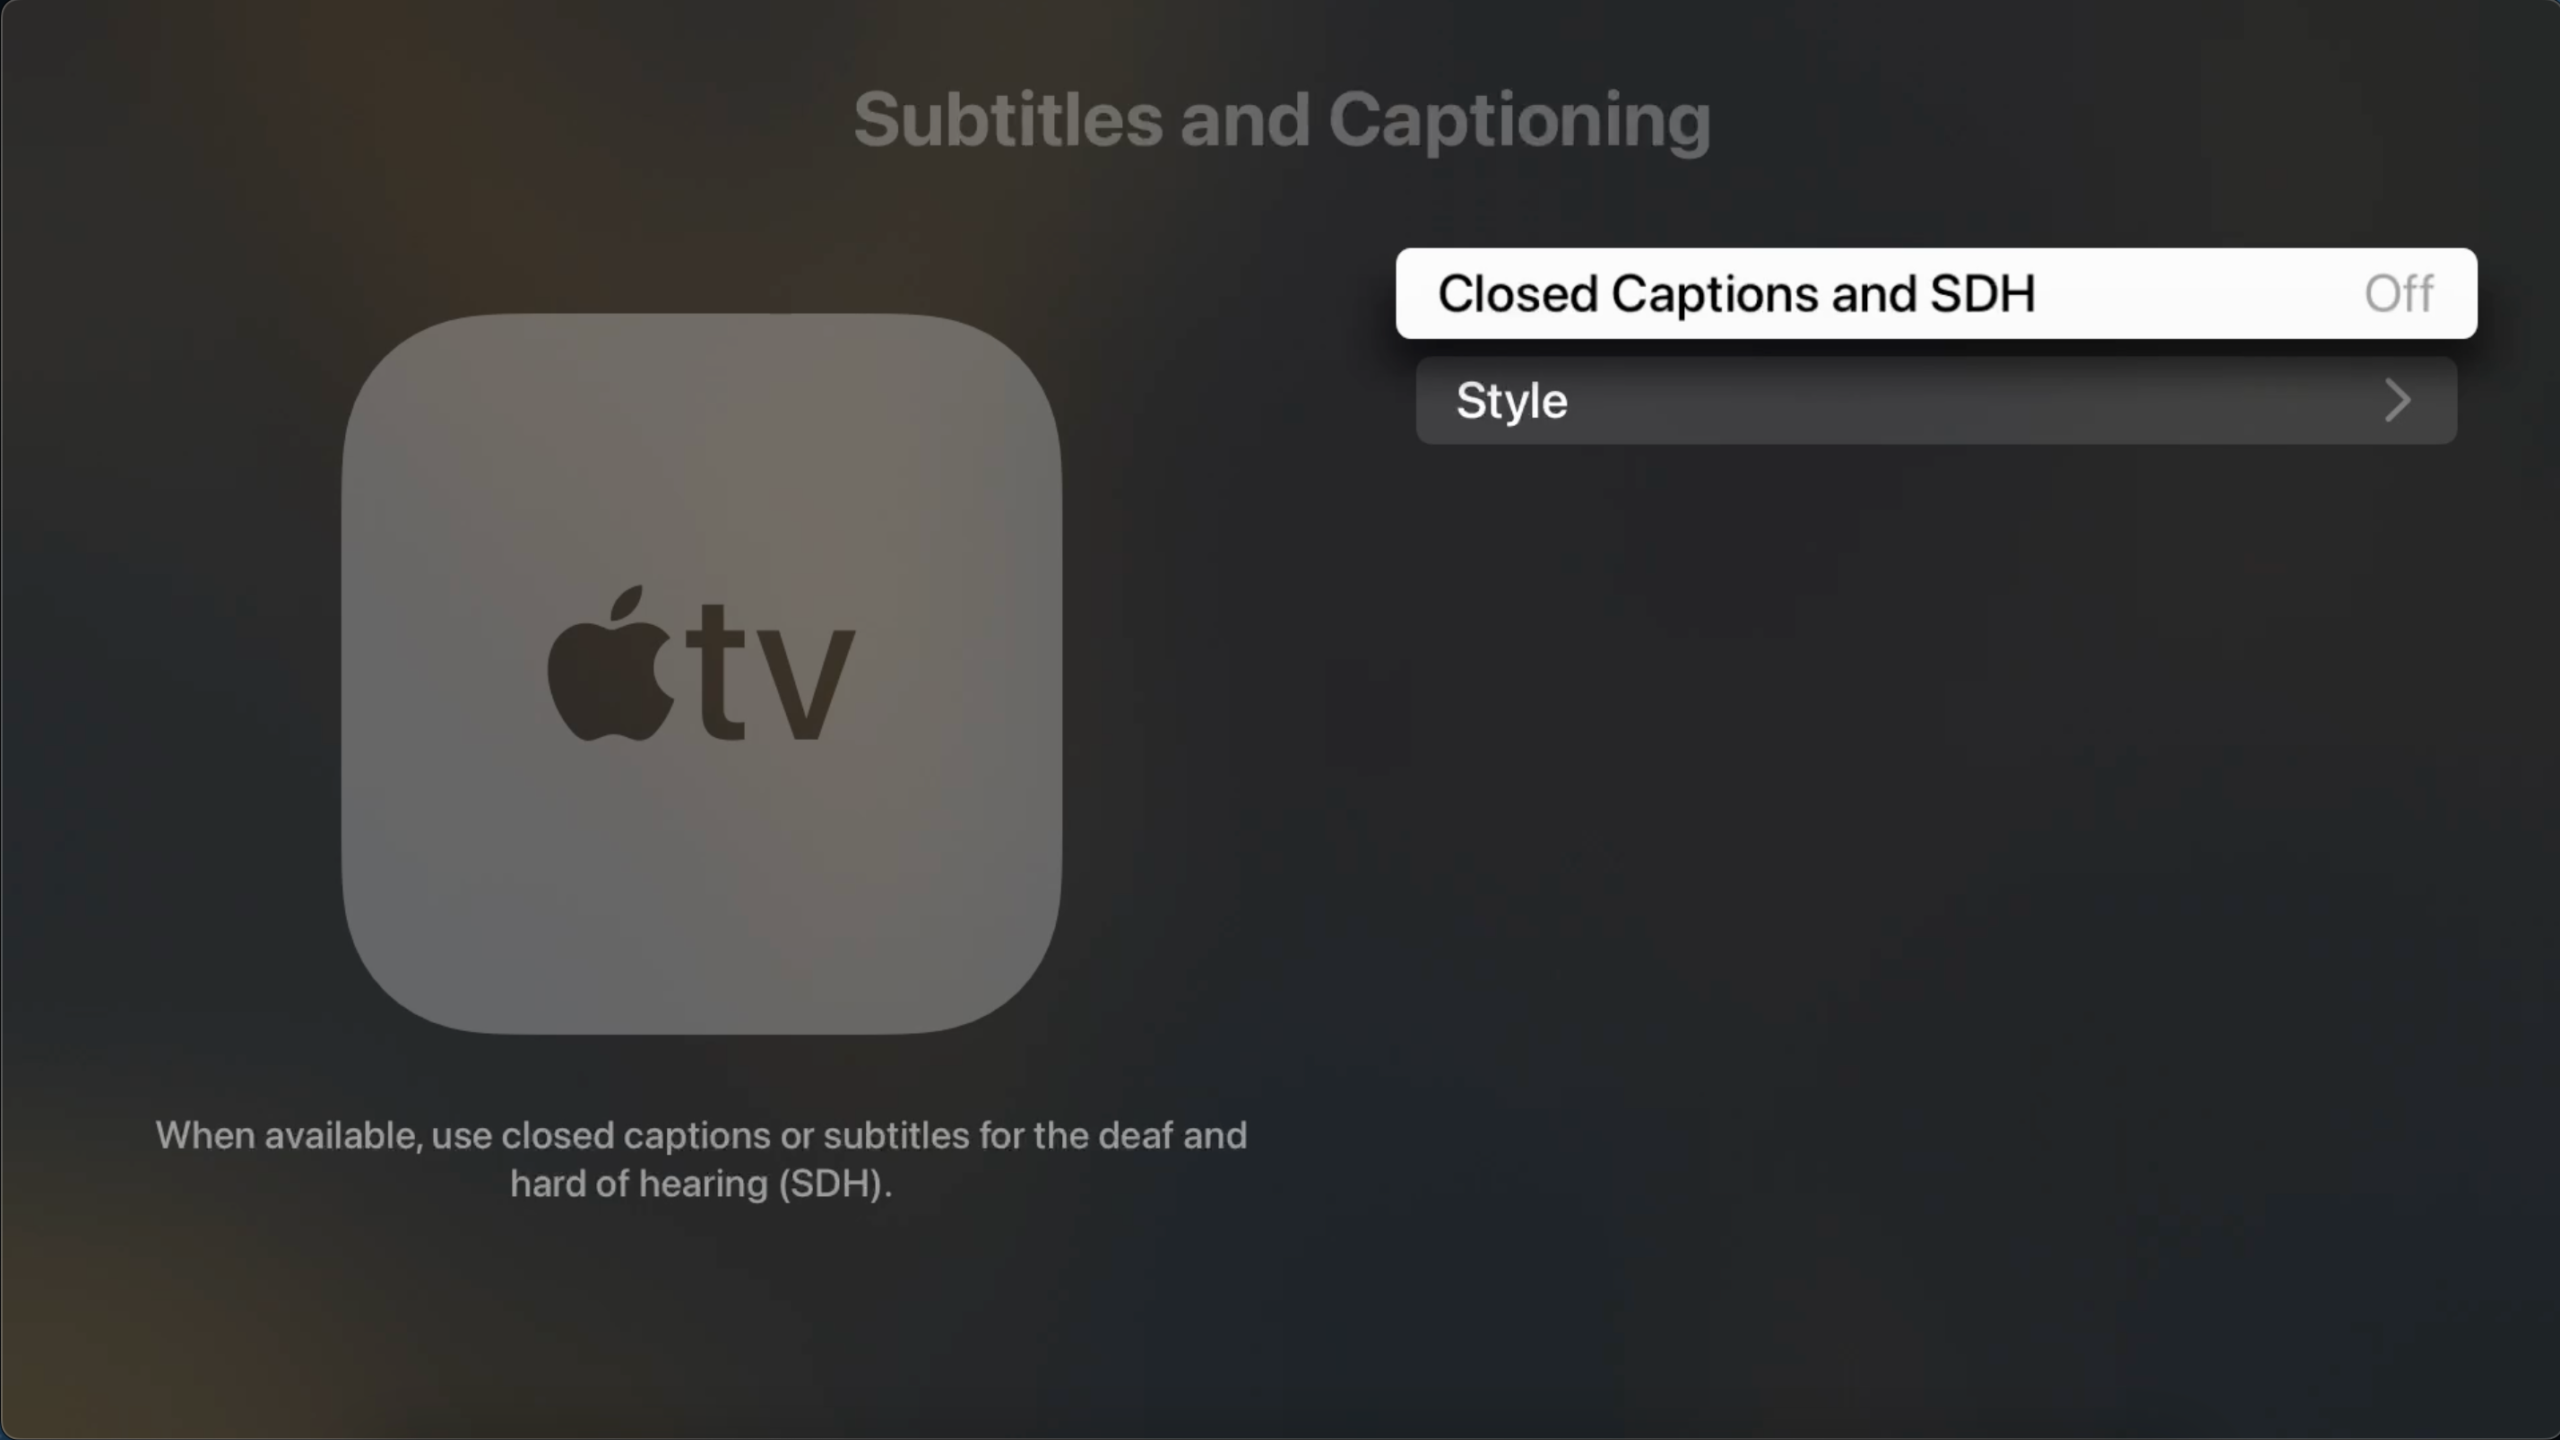 What Are The Methods To Change The Subtitle Or Audio Language In Apple Devices